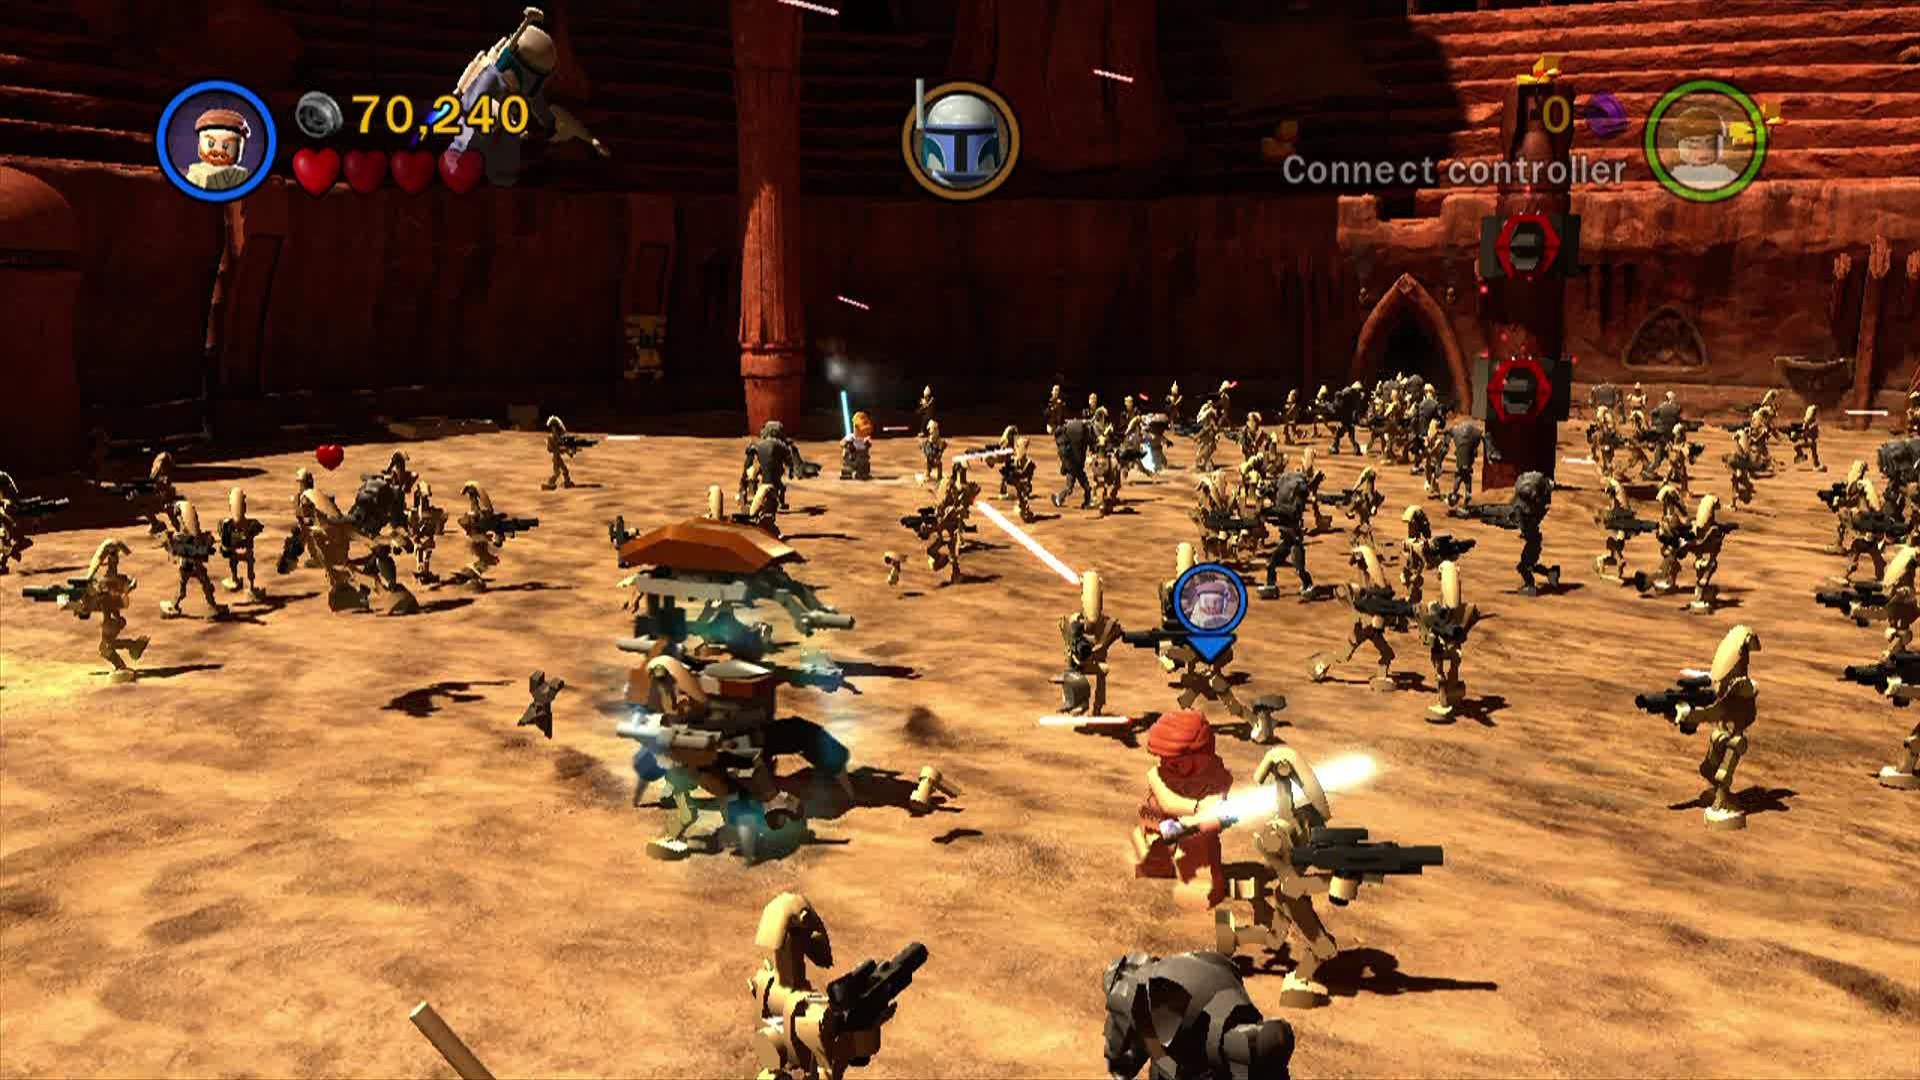 Lego star wars 3 free pc download games